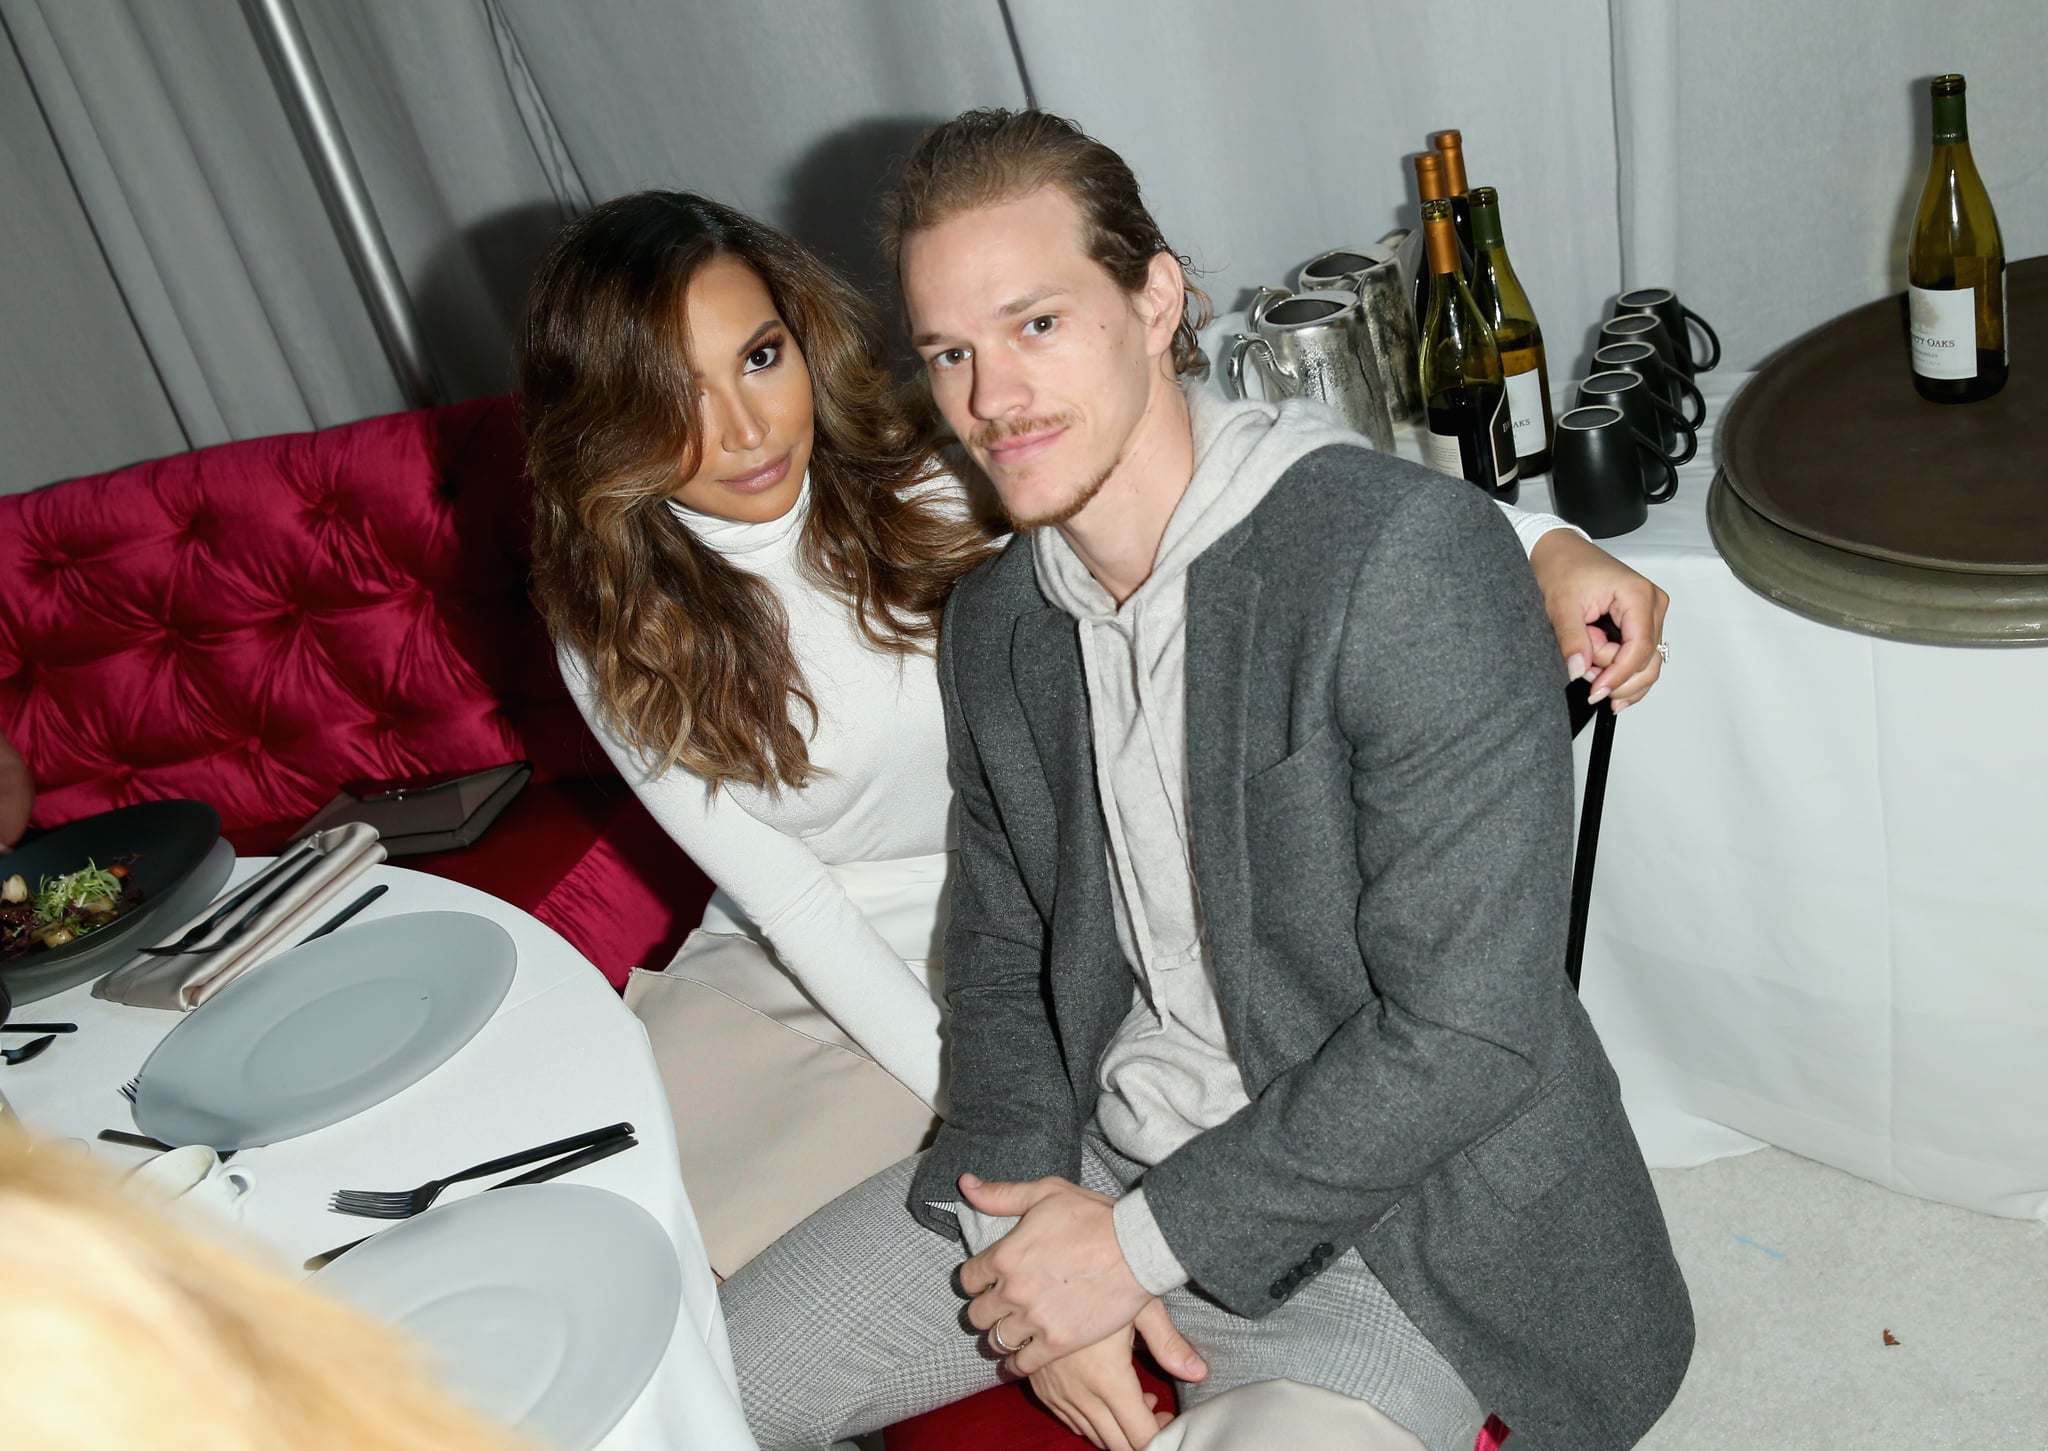 BEVERLY HILLS, CA - DECEMBER 04:  Actors Naya Rivera (L) and Ryan Dorsey attend the March Of Dimes Celebration Of Babies Luncheon honouring Jessica Alba at the Beverly Wilshire Four Seasons Hotel on December 4, 2015 in Beverly Hills, California.  (Photo by Joe Scarnici/Getty Images for March Of Dimes)